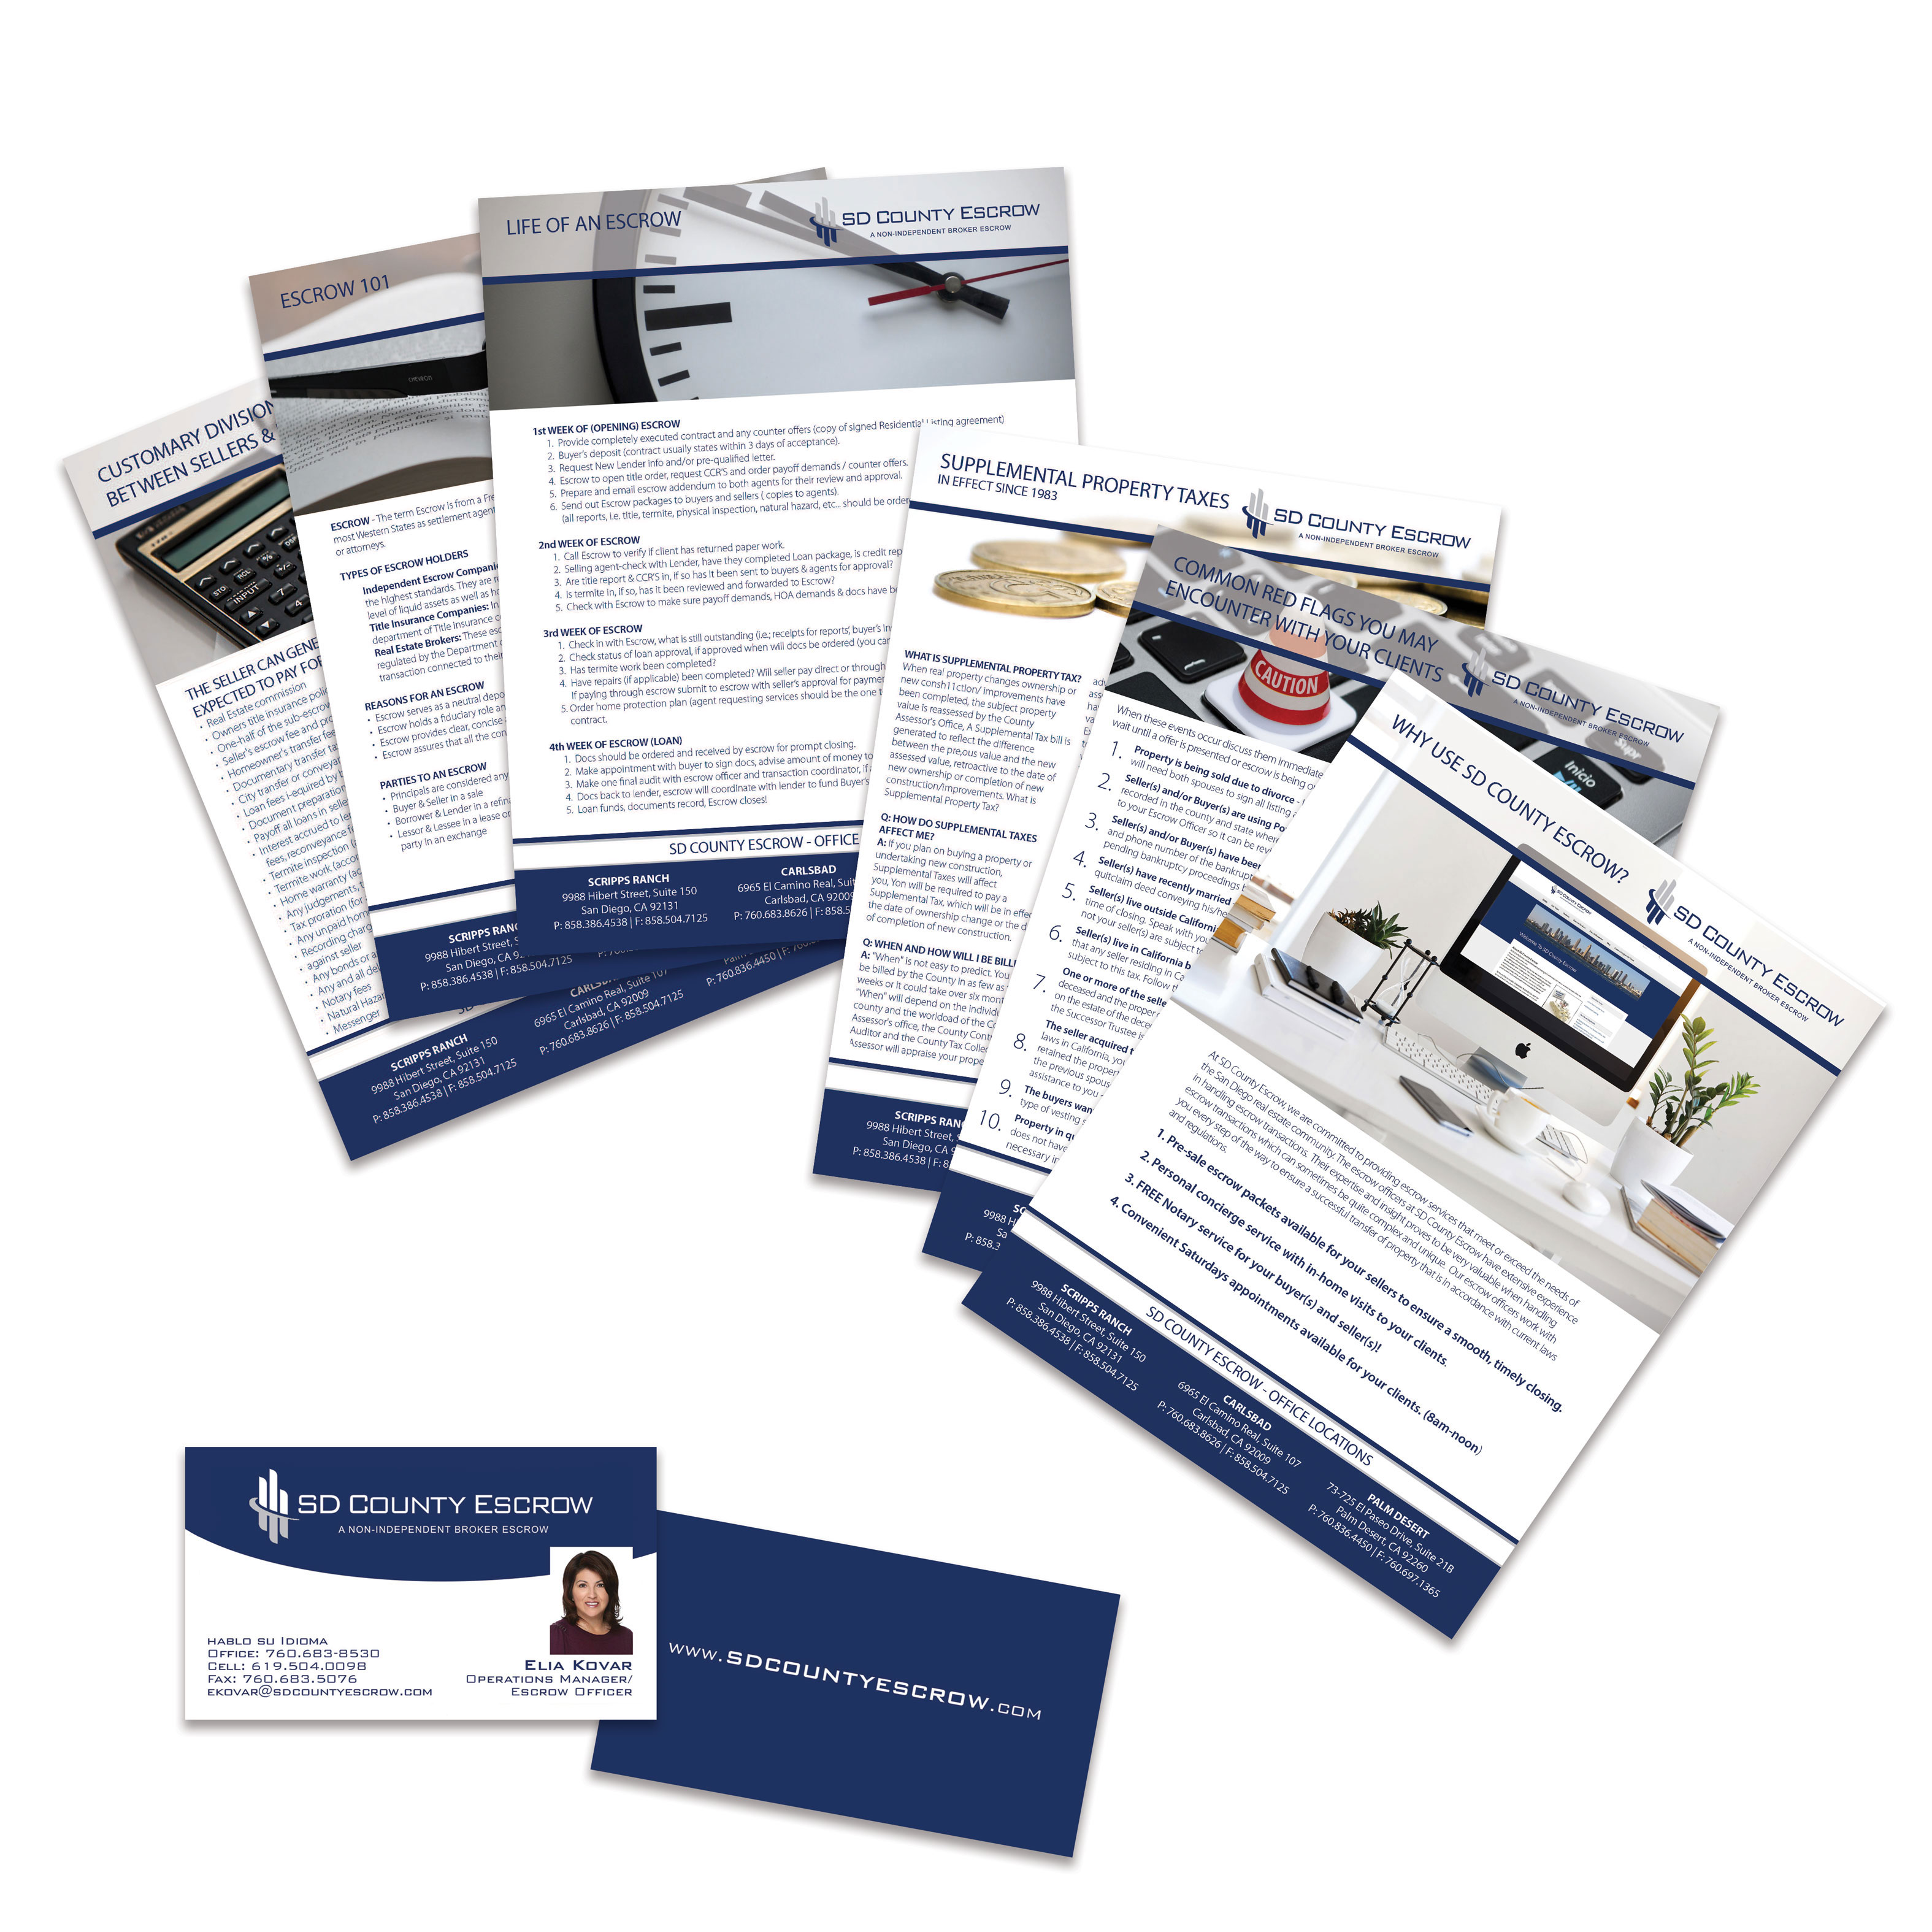 Showing examples of handout designs and business card design that has a uniform branding effect.